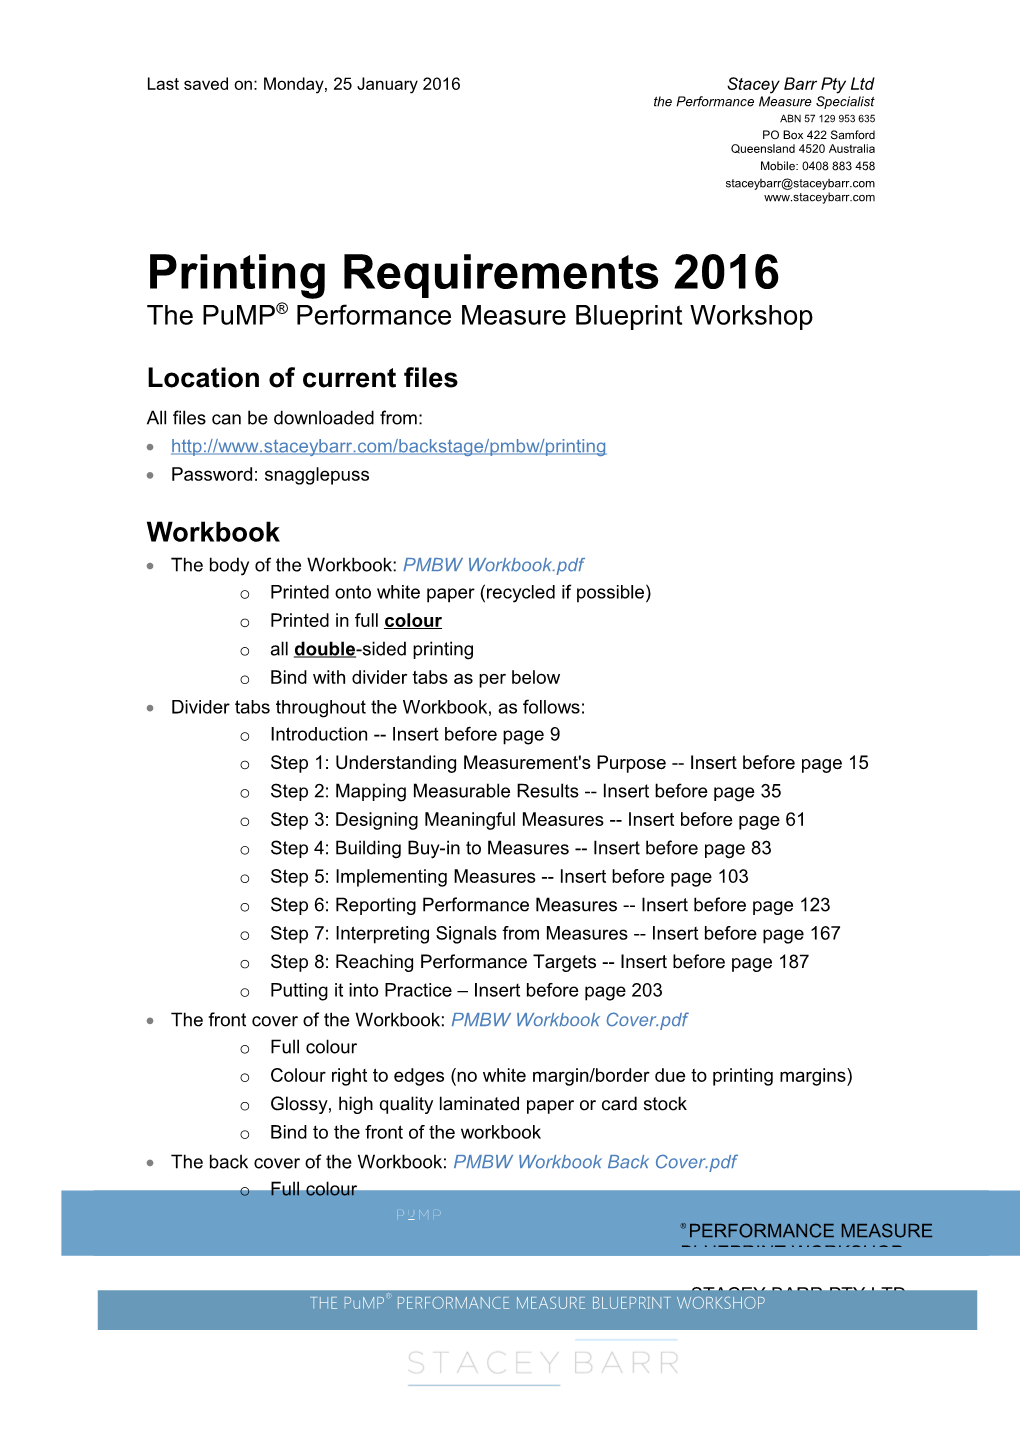 Printing Requirements 2016